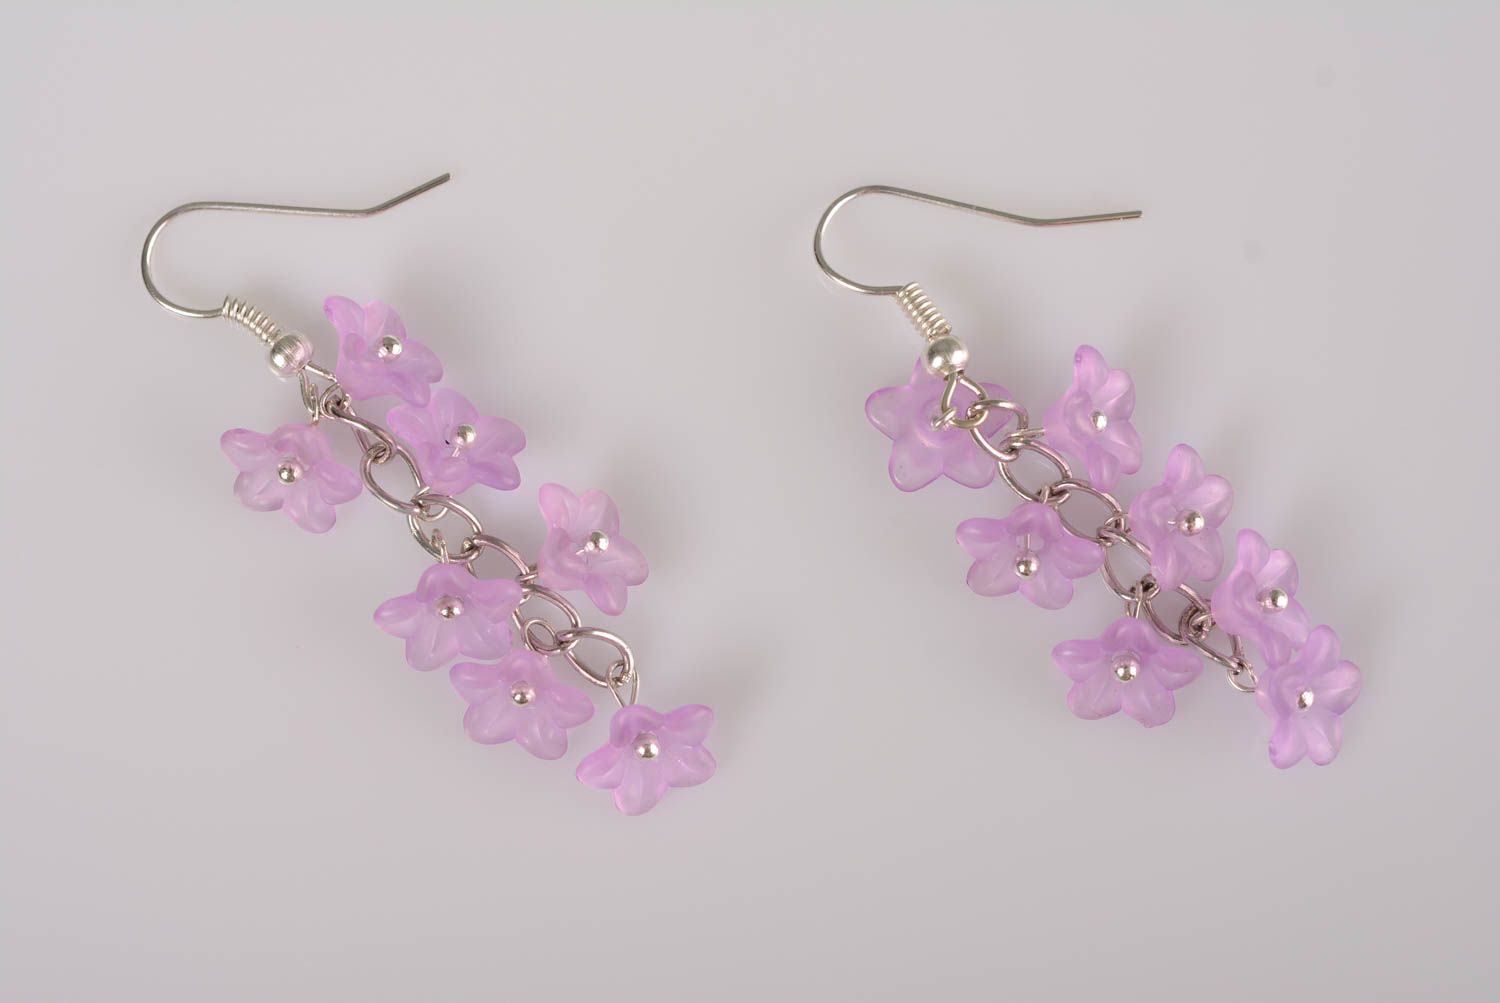 Metal earrings with plastic lilac flowers handmade stylish designer accessory photo 1